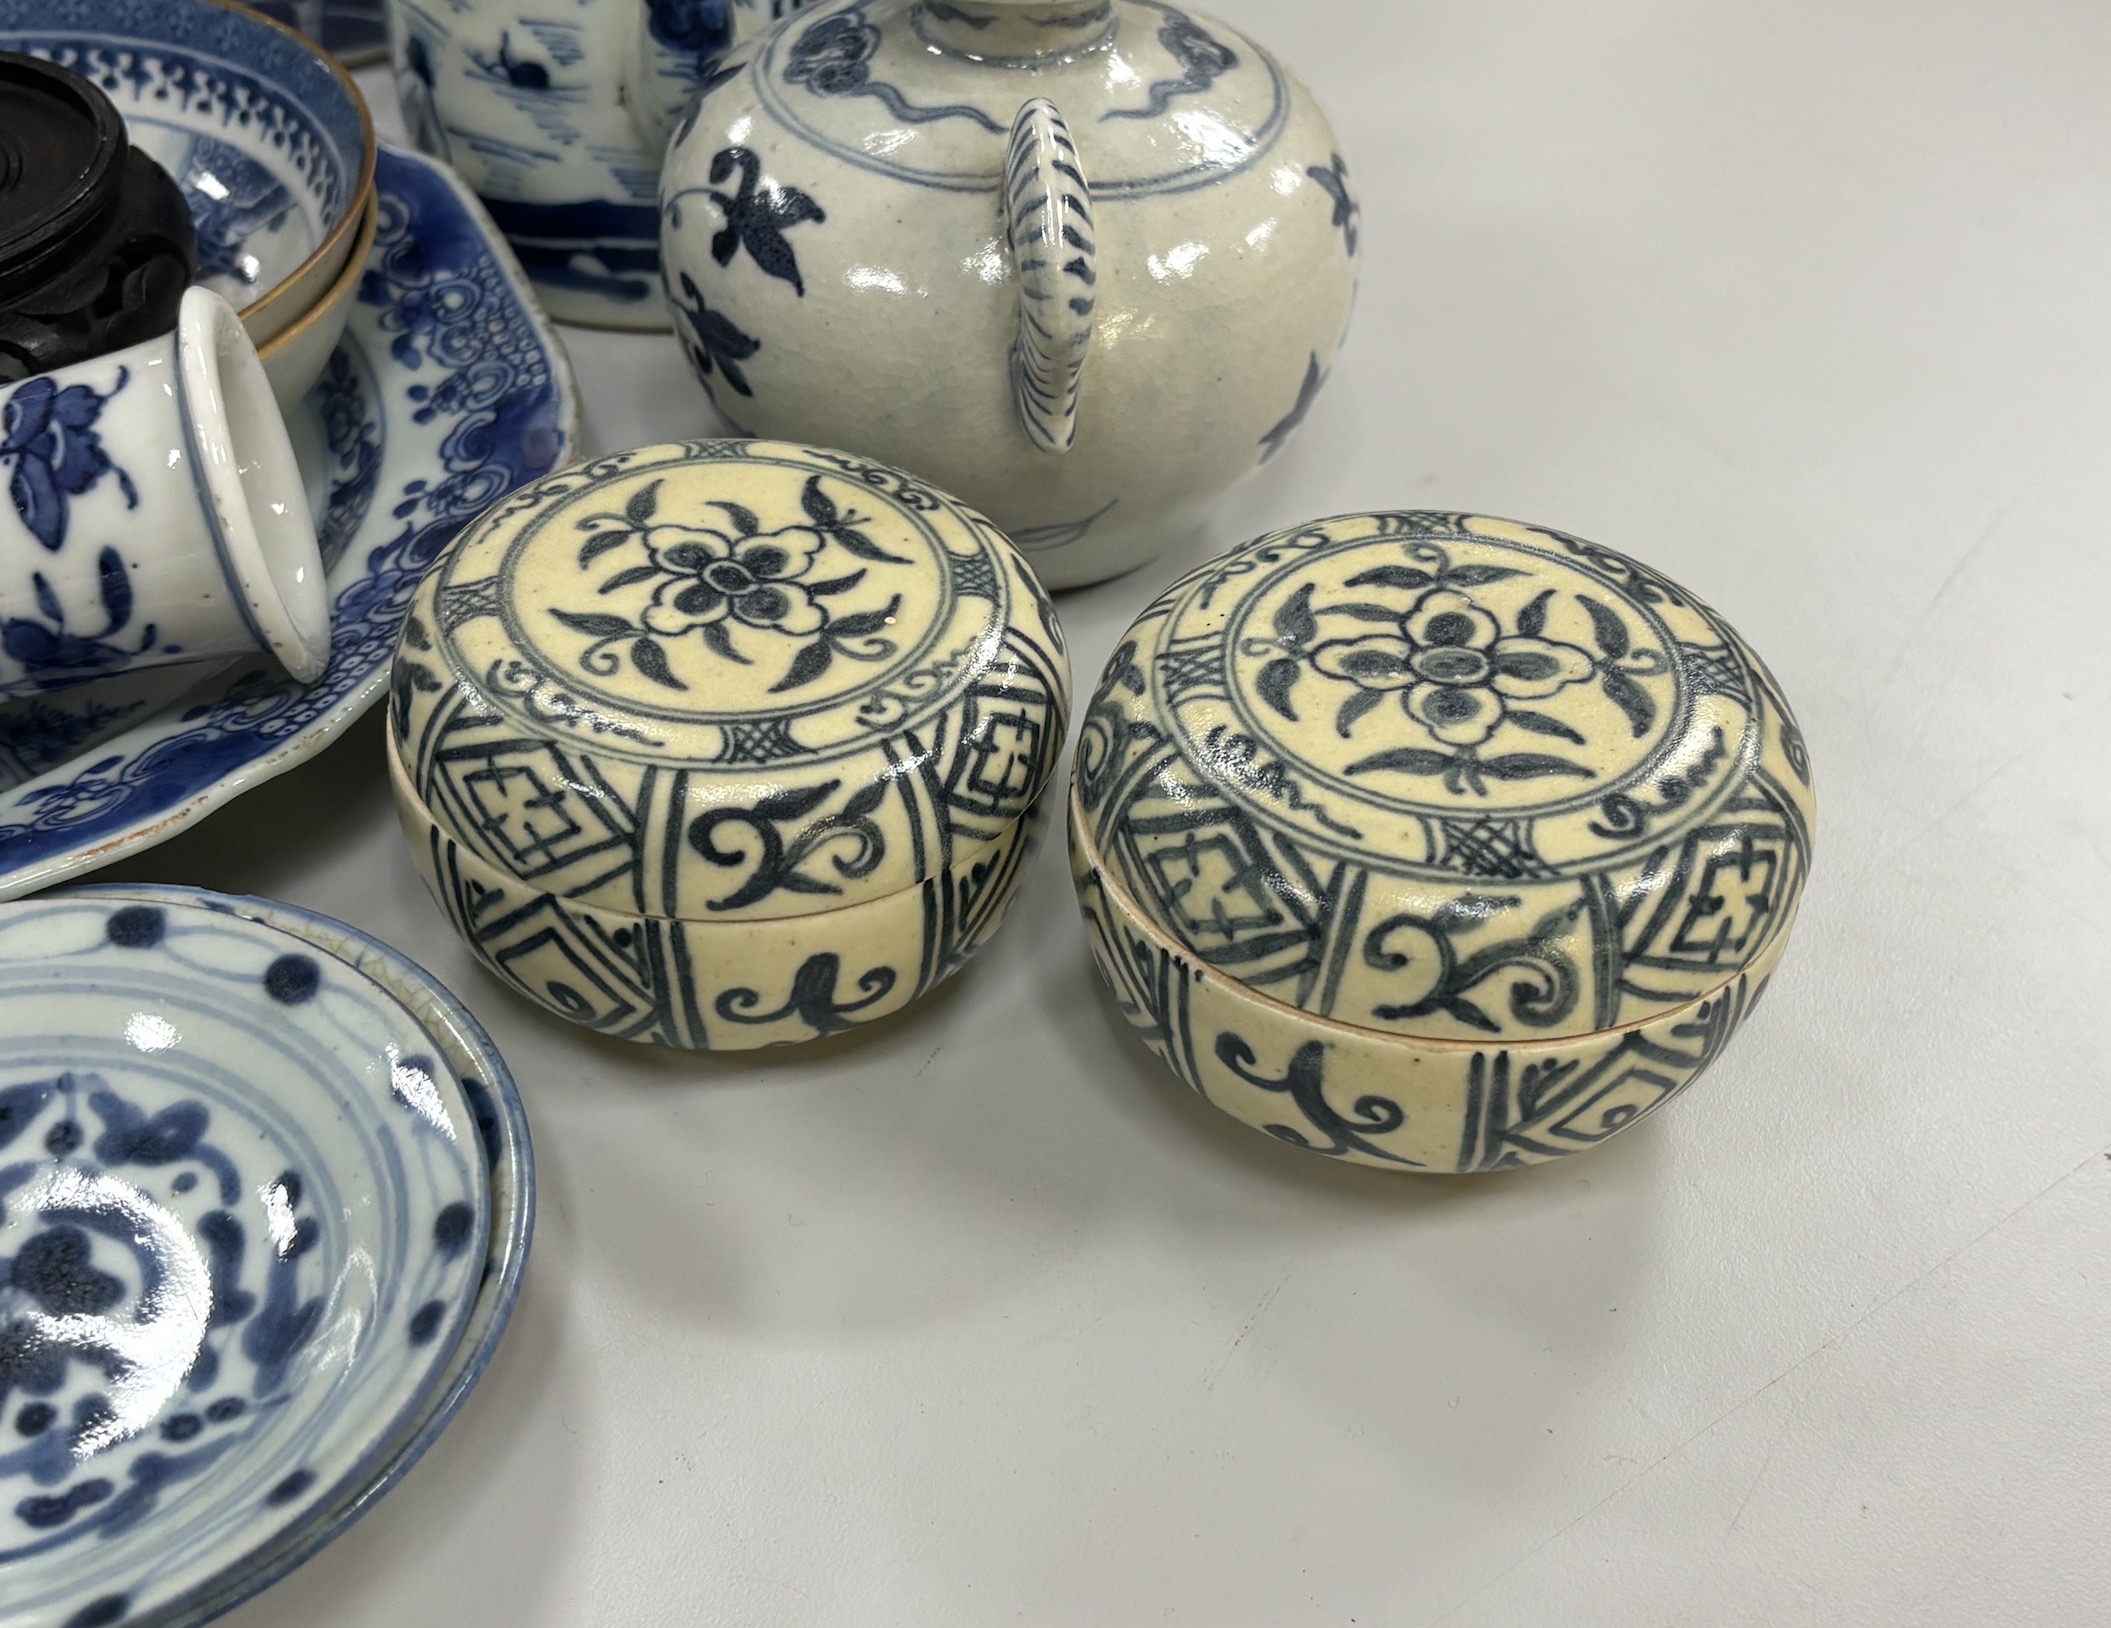 A quantity of Chinese and Annamese blue and white ceramics, 19th century and later